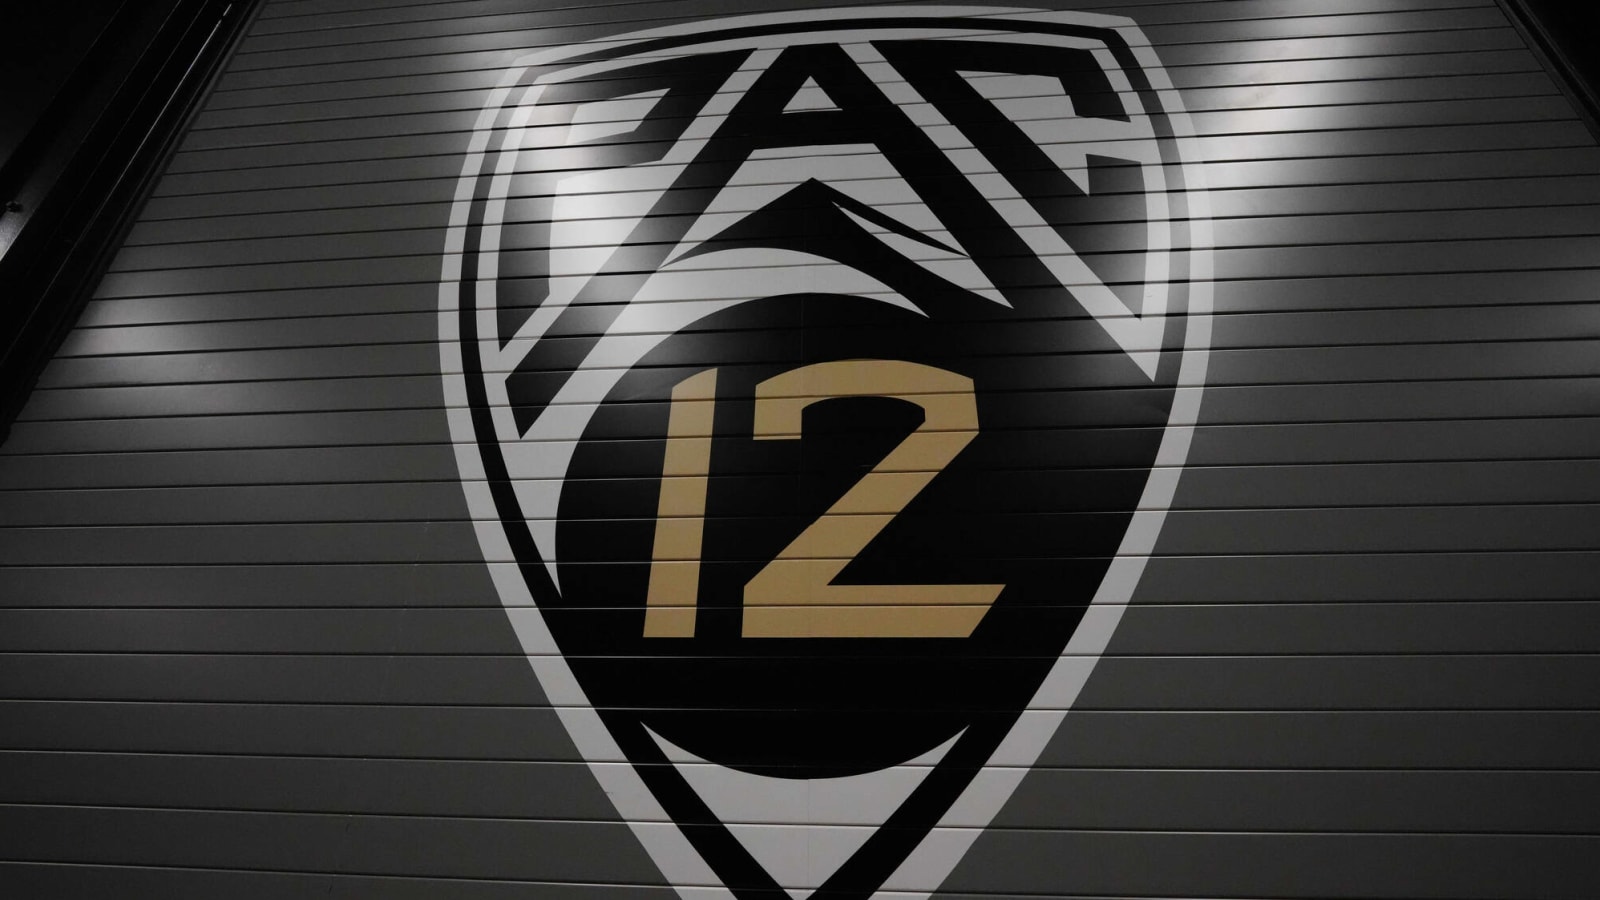 Big 12 and Pac-12 will not merge, discussions end